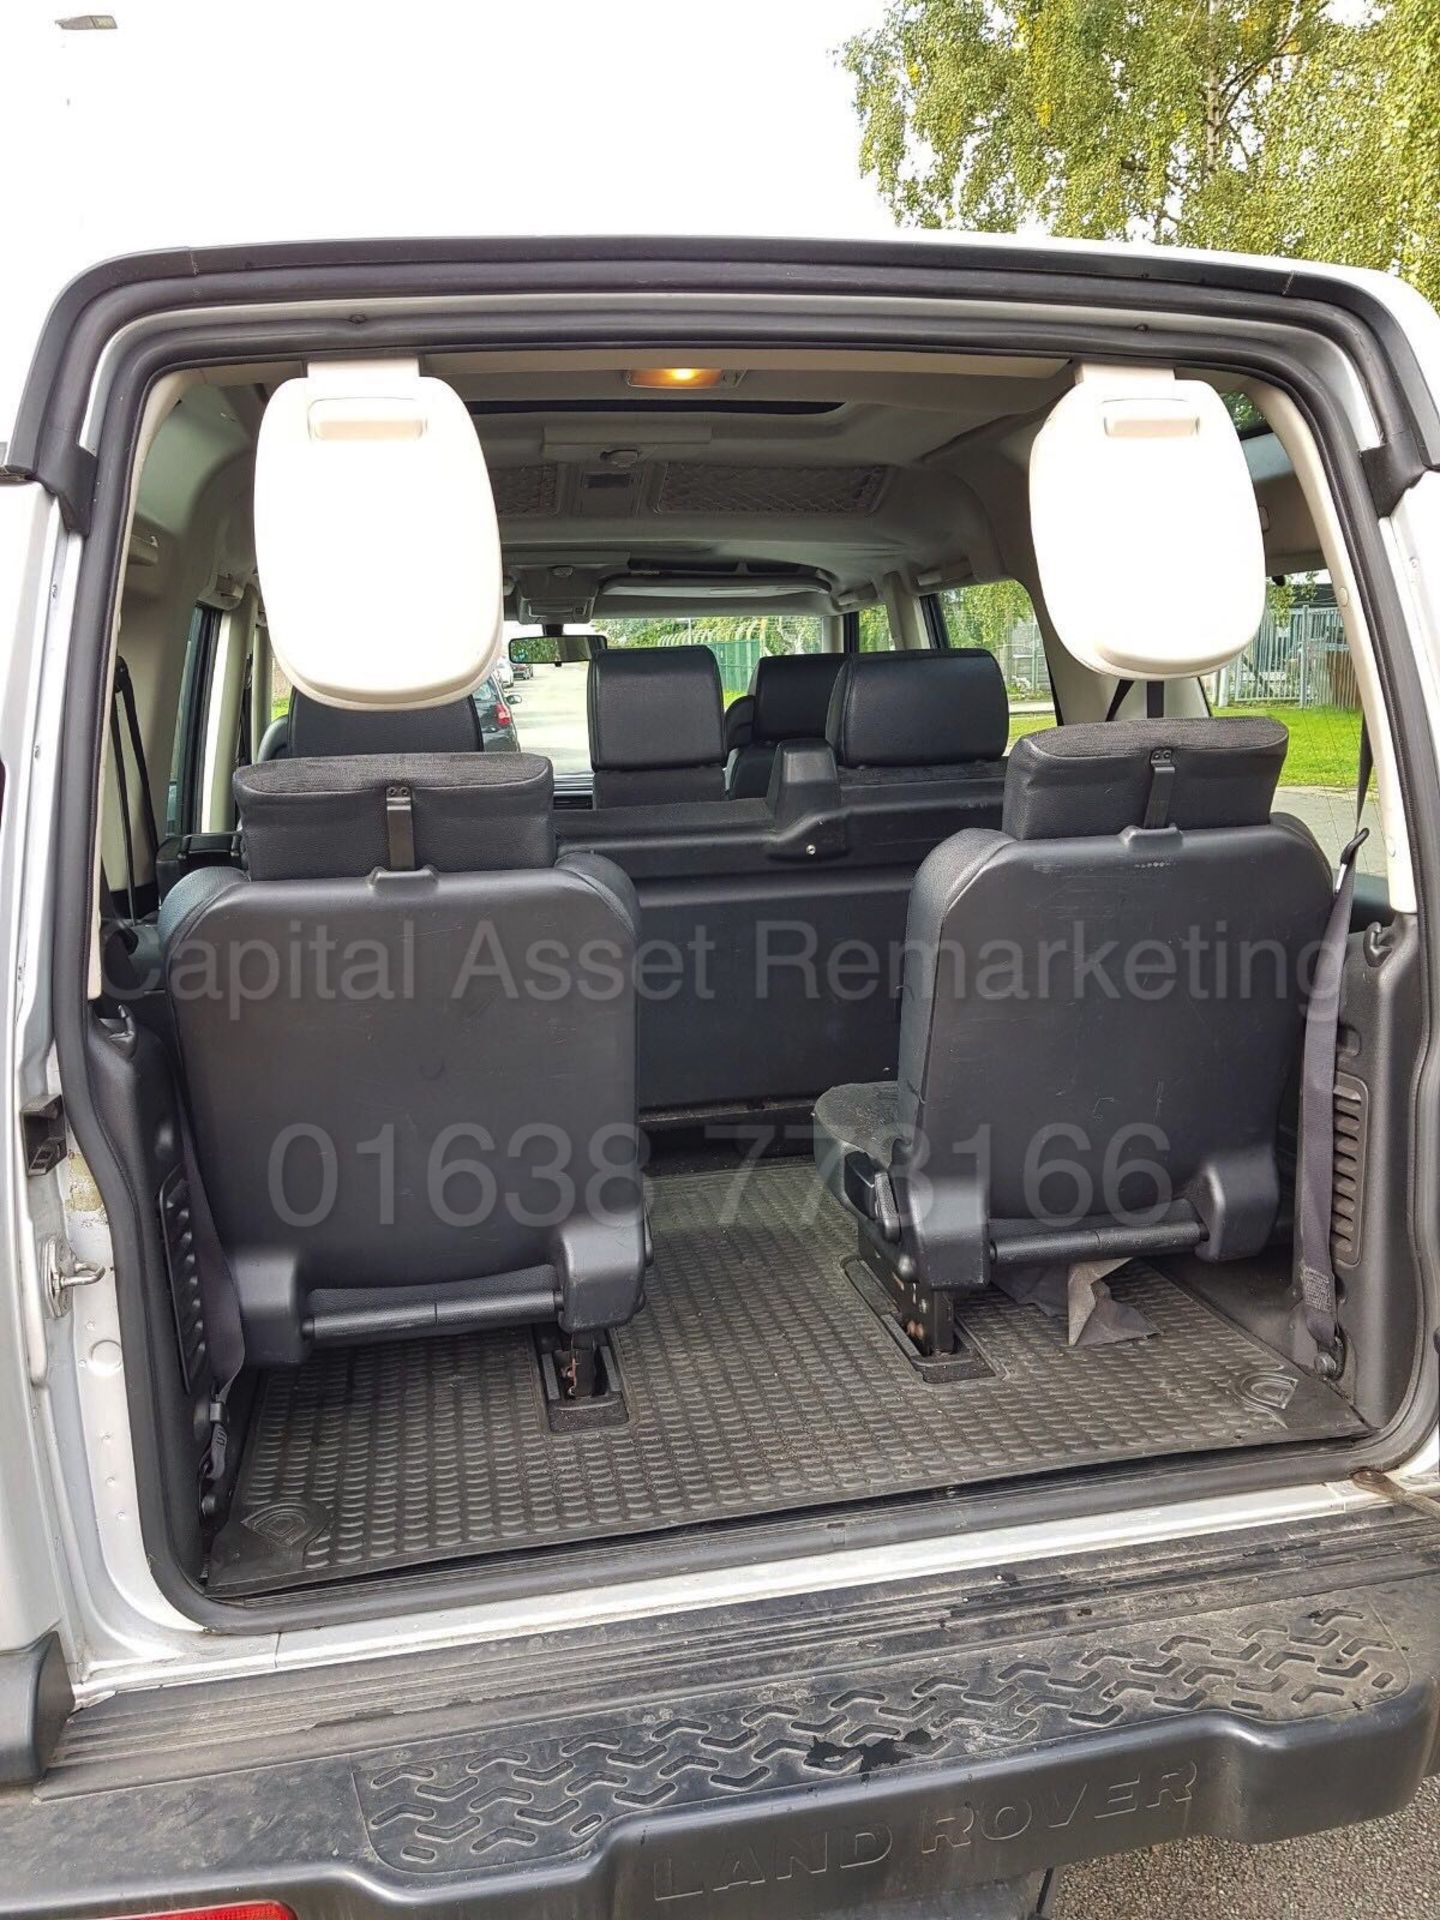 (On Sale) LAND ROVER DISCOVERY 'GS EDITION' (2004 MODEL) 'TD5 - AUTO - 7 SEATER' (NO VAT - SAVE 20%) - Image 14 of 16